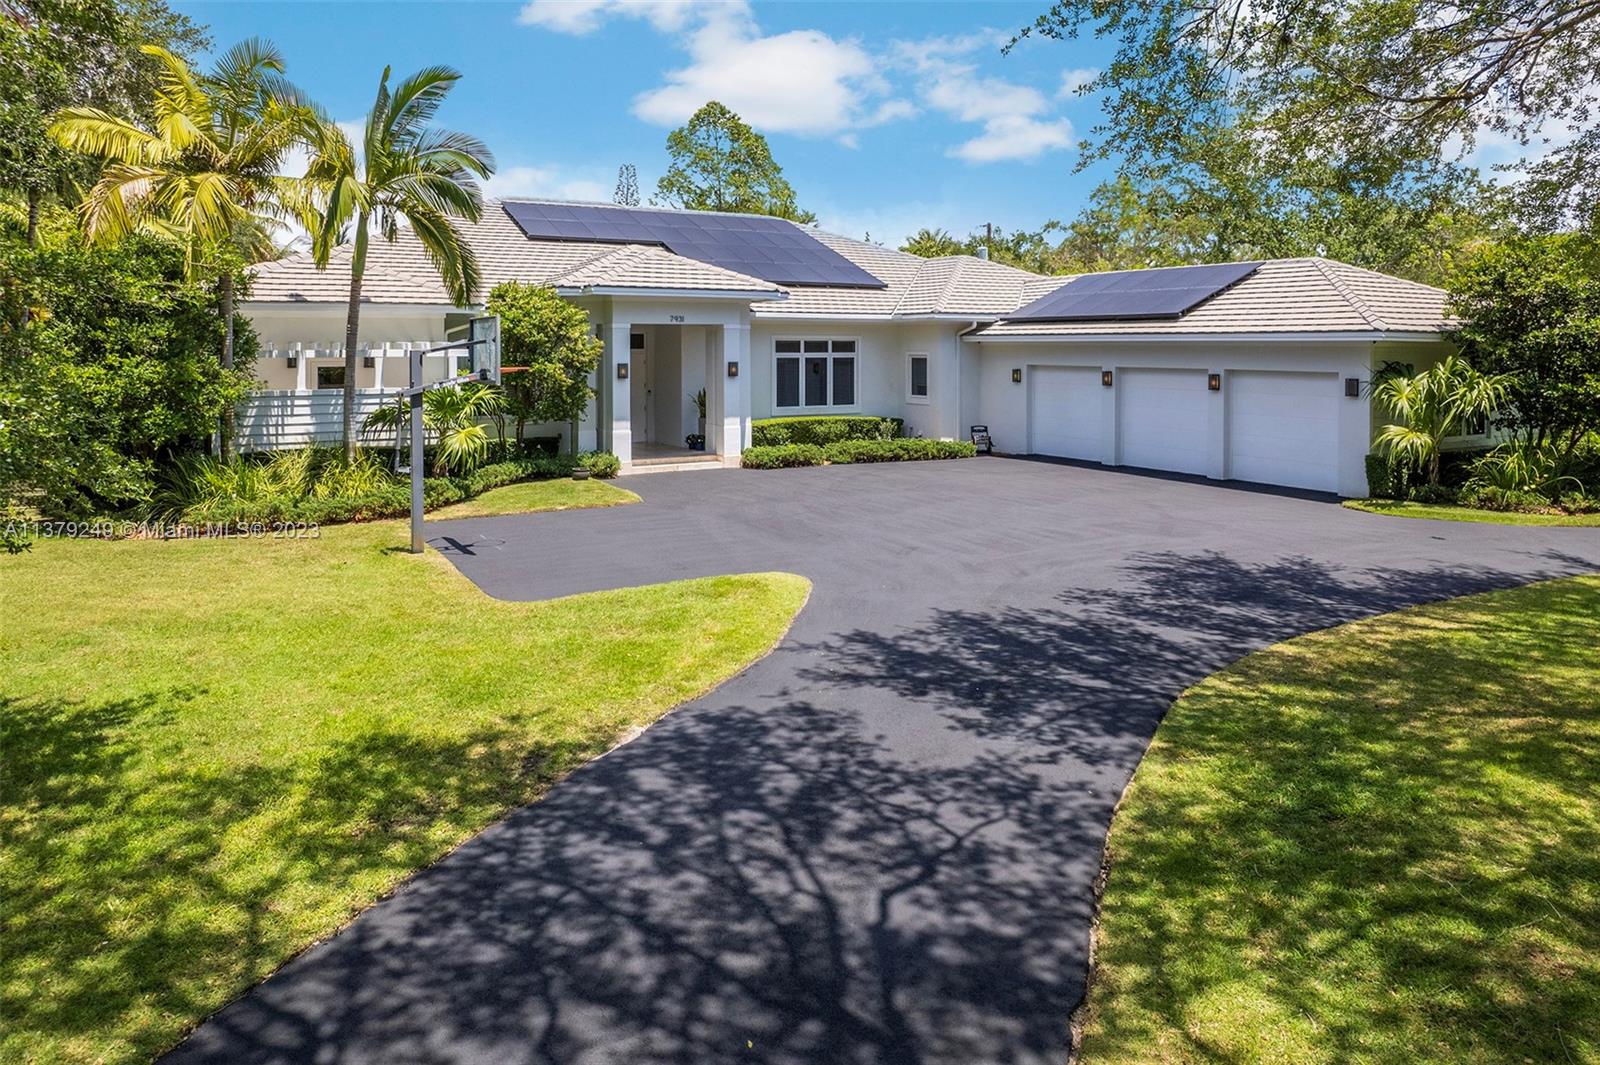 This exquisite 5 bedroom/4 bathroom home in the heart of Pinecrest is perfect for families and those who love to entertain. Beautiful acre property boasts a 2016 new construction home w/ an abundance of natural light & over 4,300 SF of luxurious features, including: hurricane impact windows/doors, open & split floor plan, high ceilings, Sonos sound system inside & outside, Enphase solar system/generator, security cameras. Gourmet kitchen/breakfast area overlooks sweeping backyard, heated saltwater pool & oversized covered patio. Master bedroom has large walk-in closets, a beautiful bathroom and an outdoor shower. The home has a 3-car garage & ample parking space. Located on a quiet street, close to the best private & public schools in Miami, & steps away from parks, shops, and restaurants.